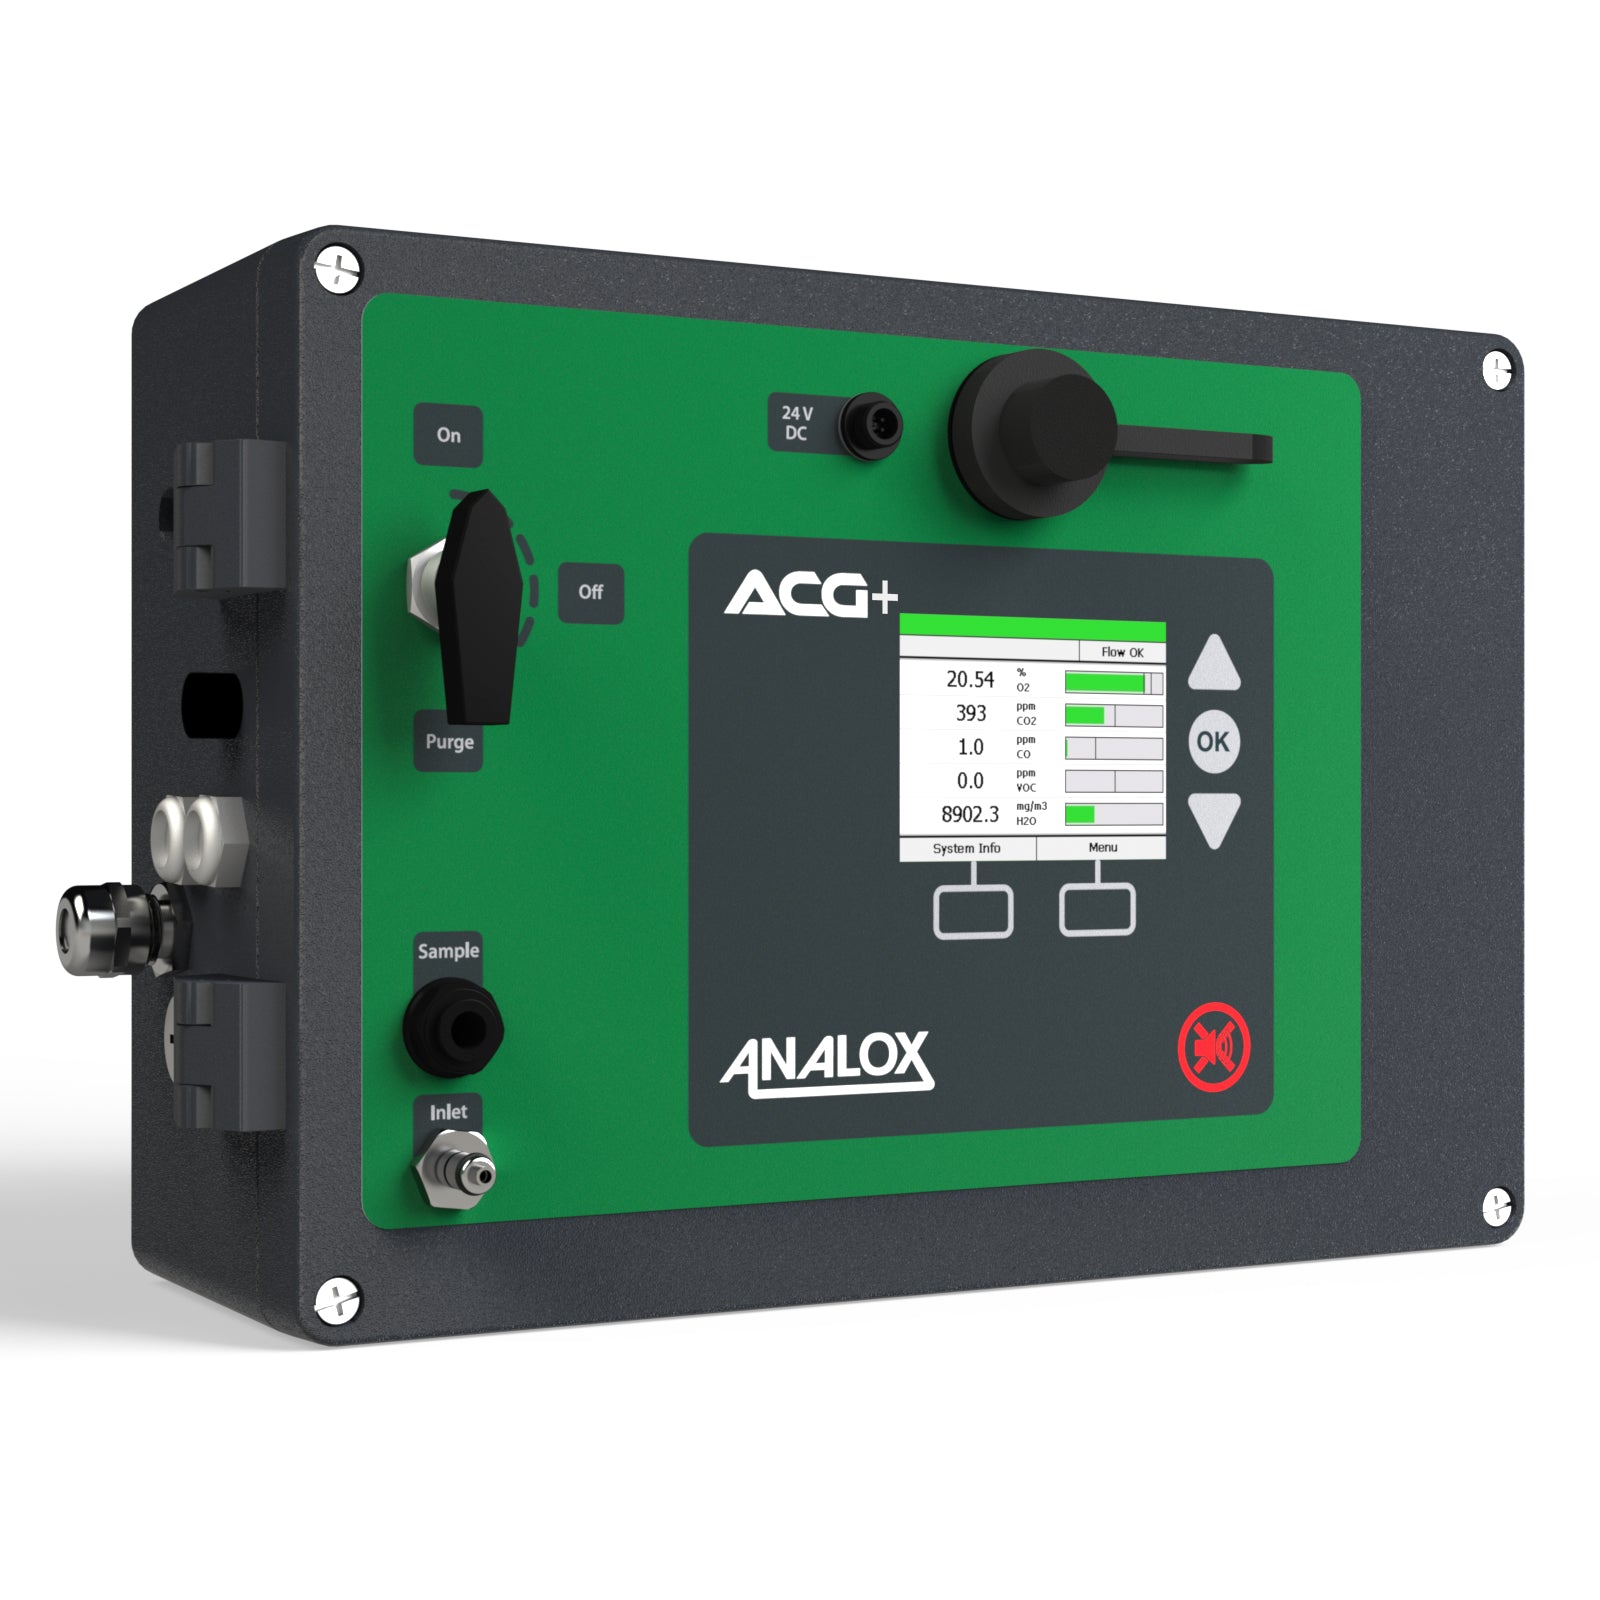 A rendering showing the ACG+ breathing air monitor from Analox. Front view showing main input controls.